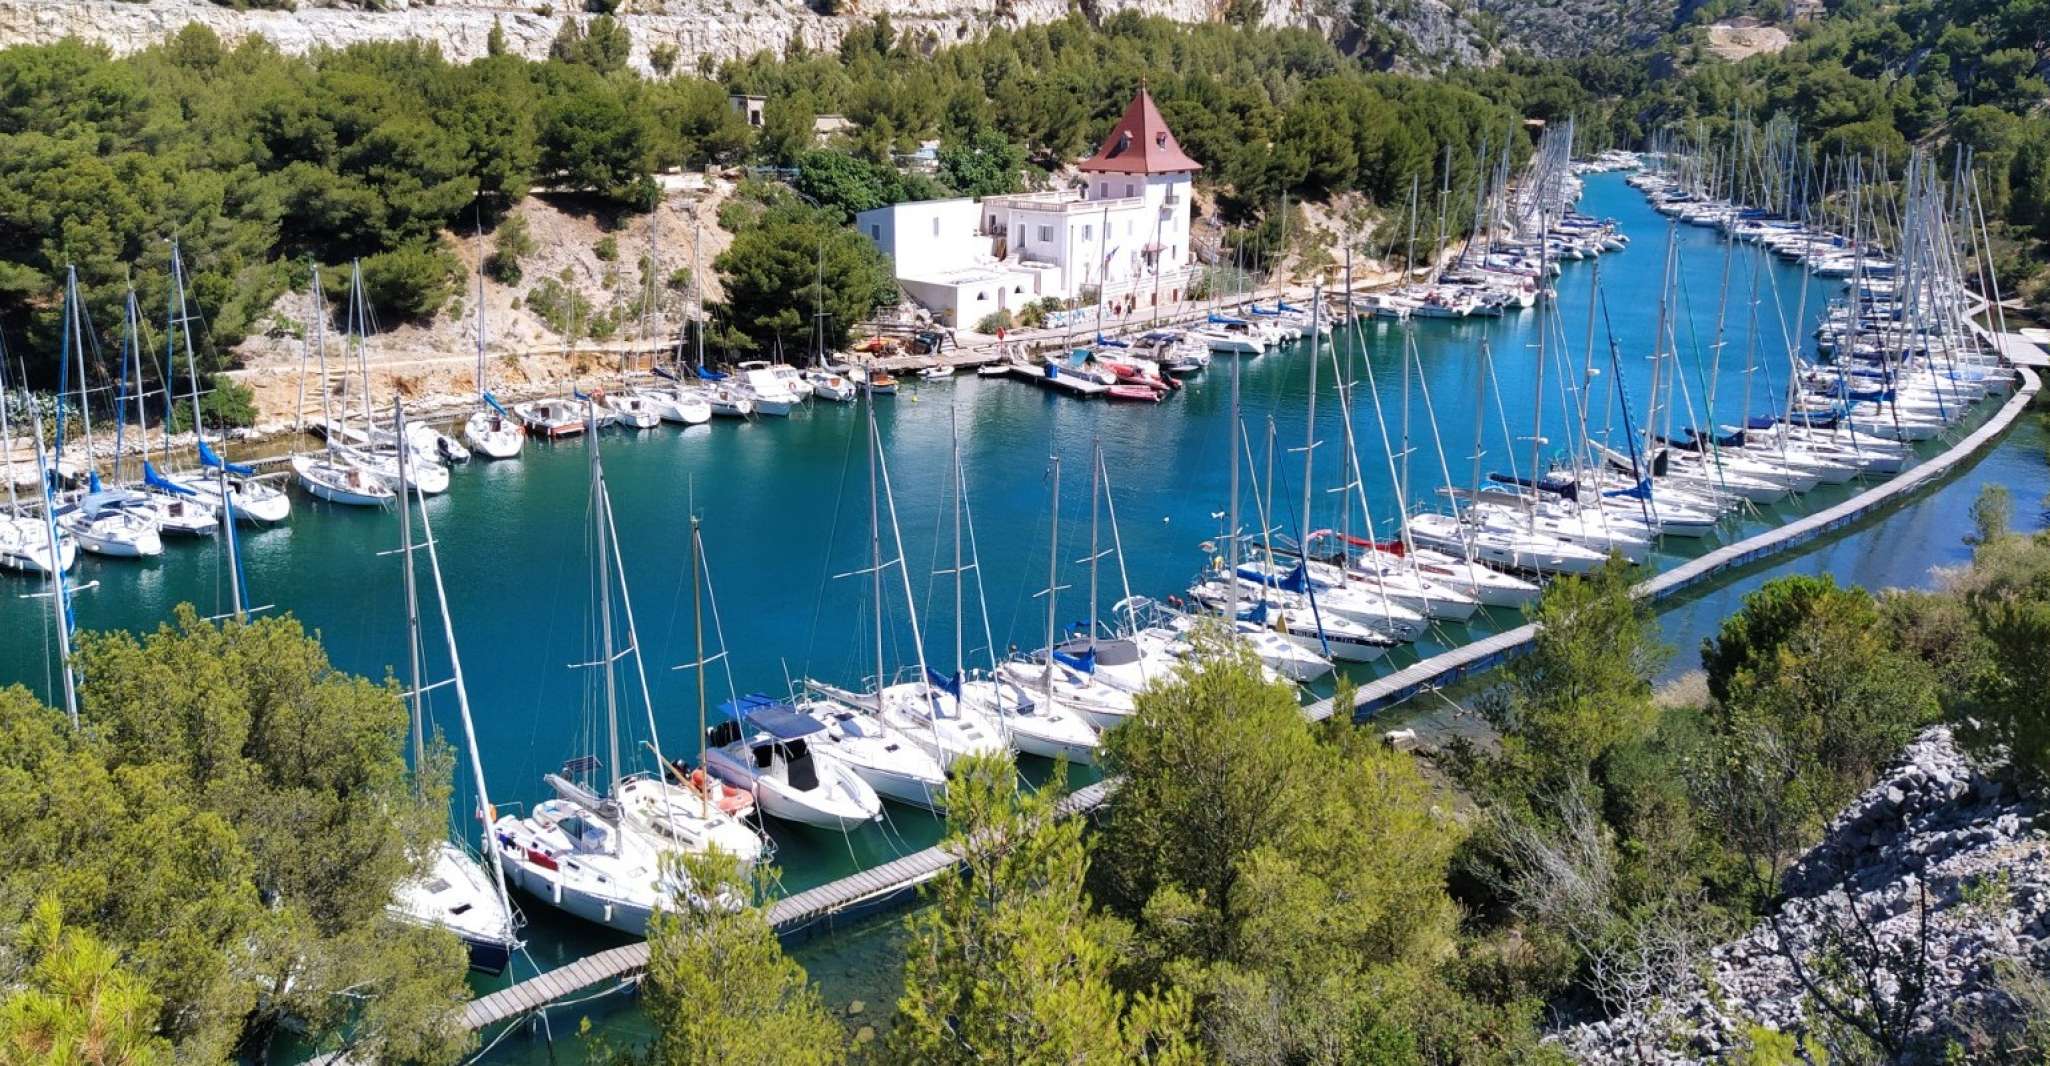 Cassis, Calanques National Park Standup Paddleboarding Tour - Housity